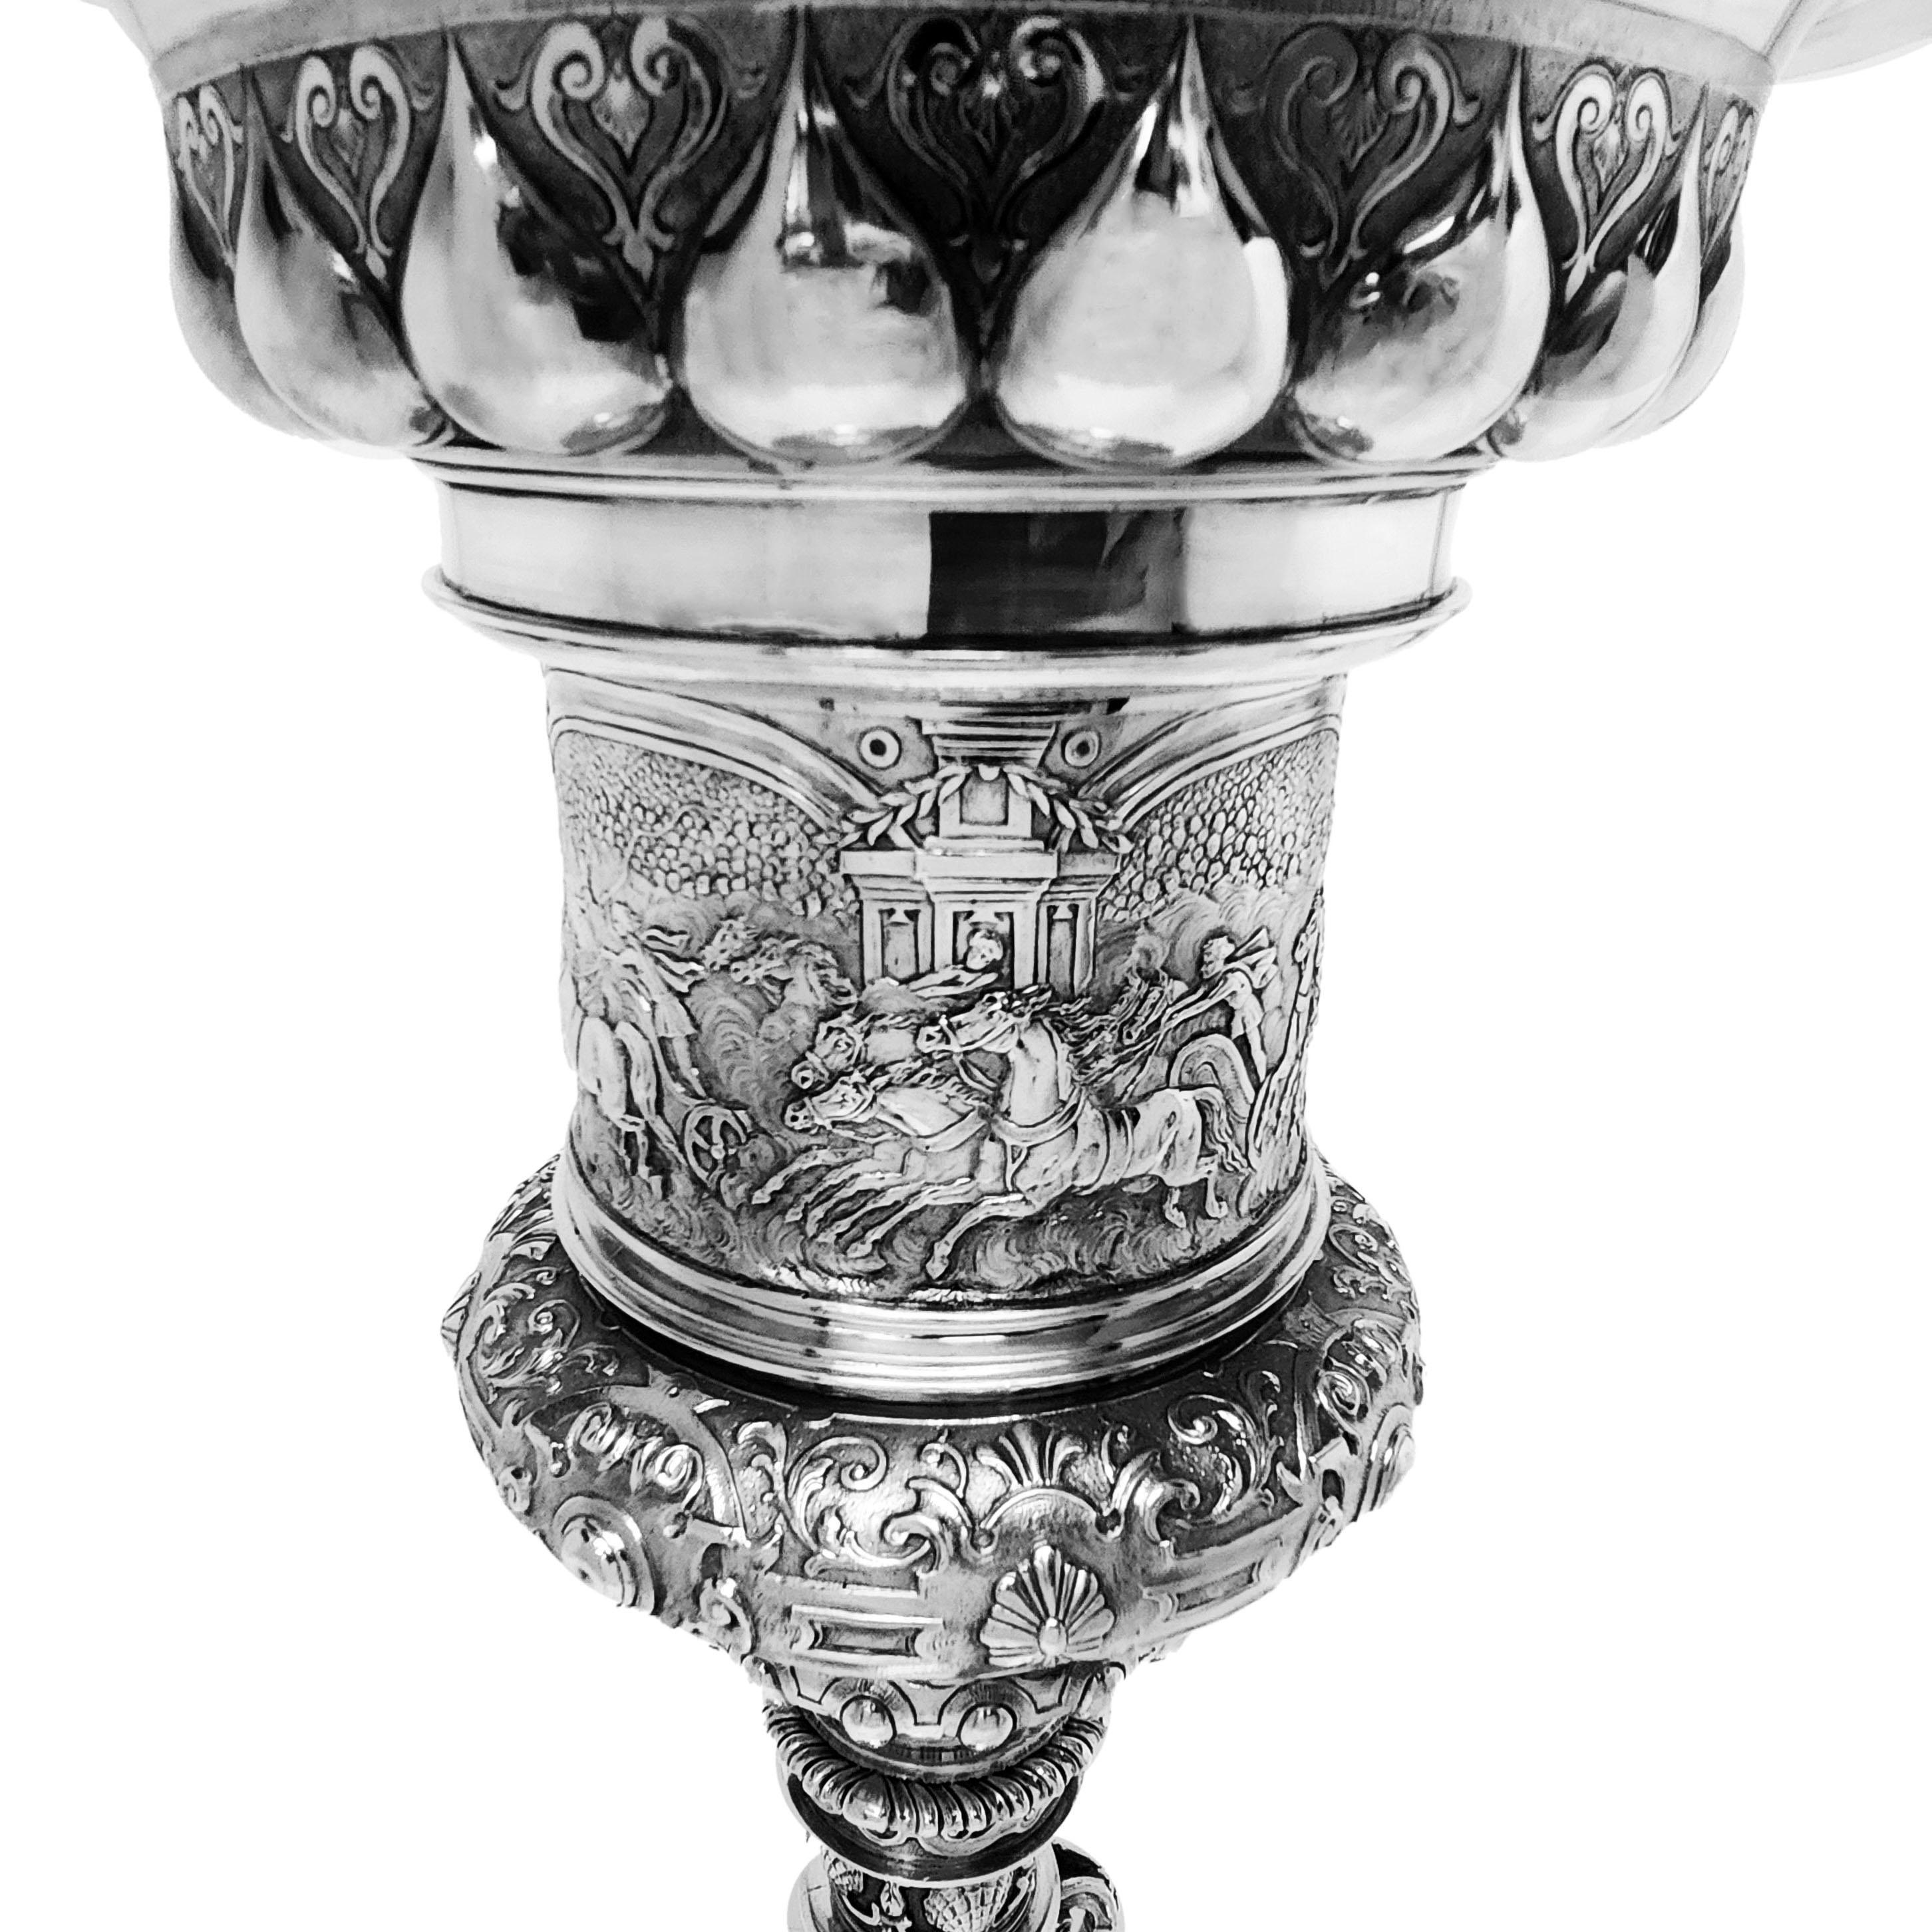 20th Century Antique Silver Steeple Cup Lidded Cup & Cover 1902 17th Century Style  For Sale